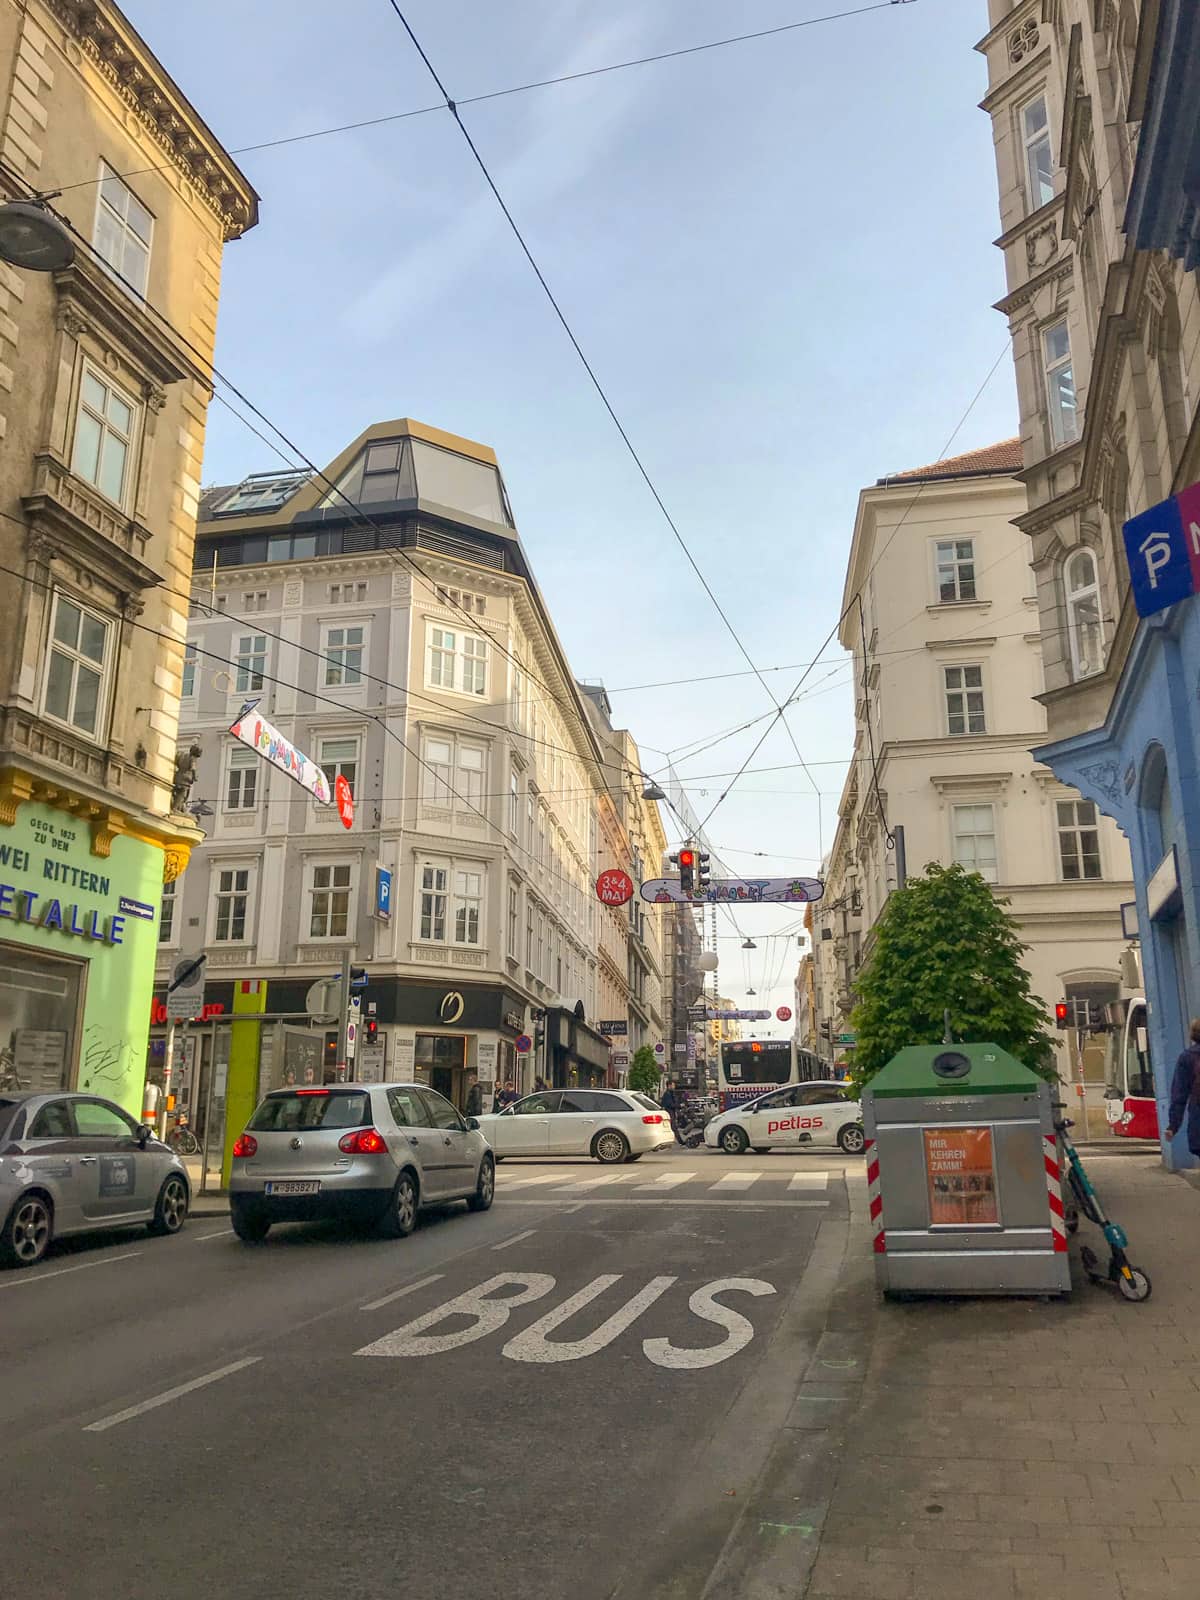 A view of a street in Vienna, in the late afternoon, showing an intersection that is going slightly uphill